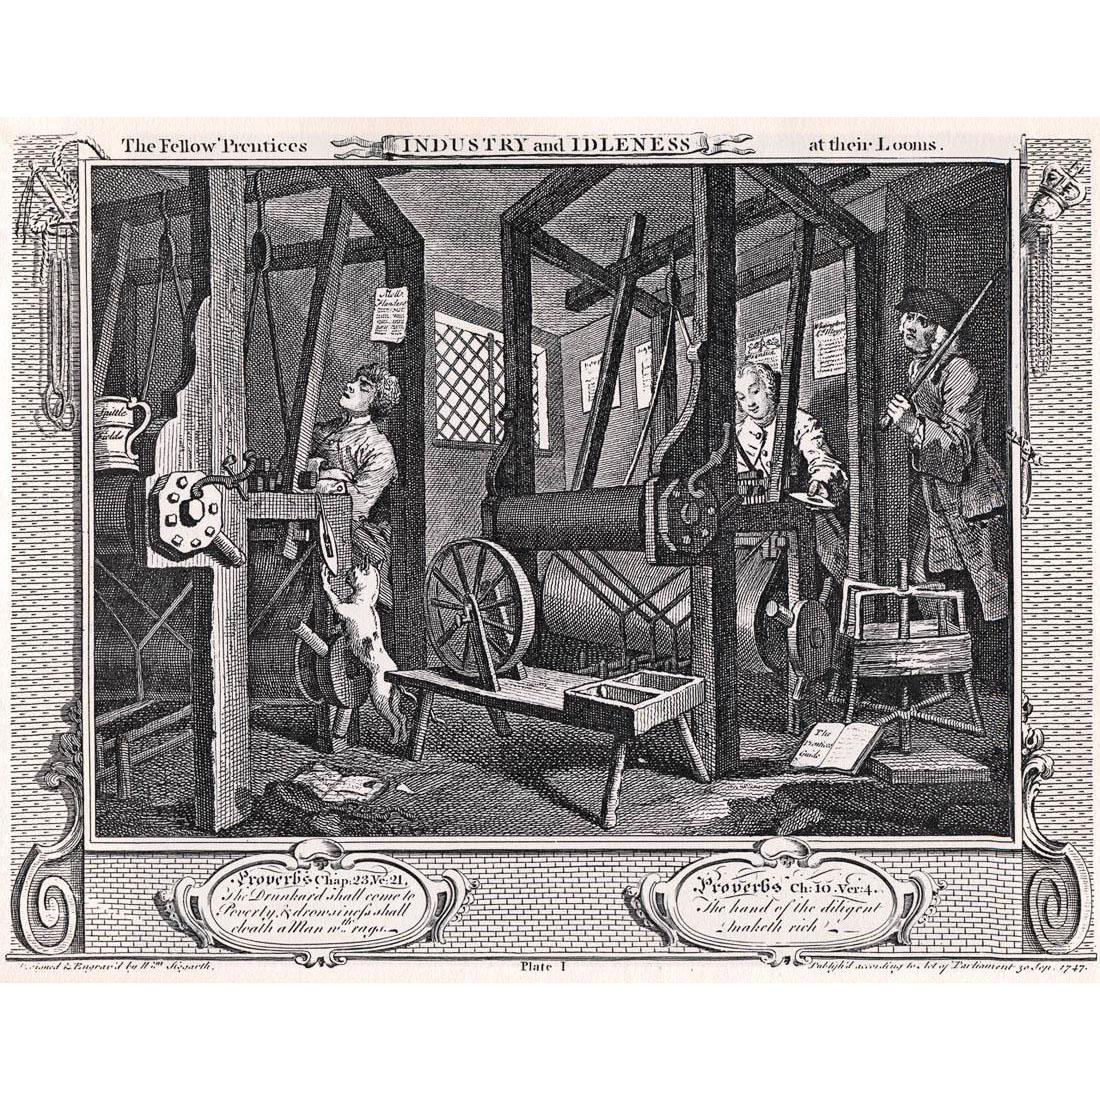 William Hogarth. The Fellow Prentices at their Looms. Industry and Idleness #1. 1747